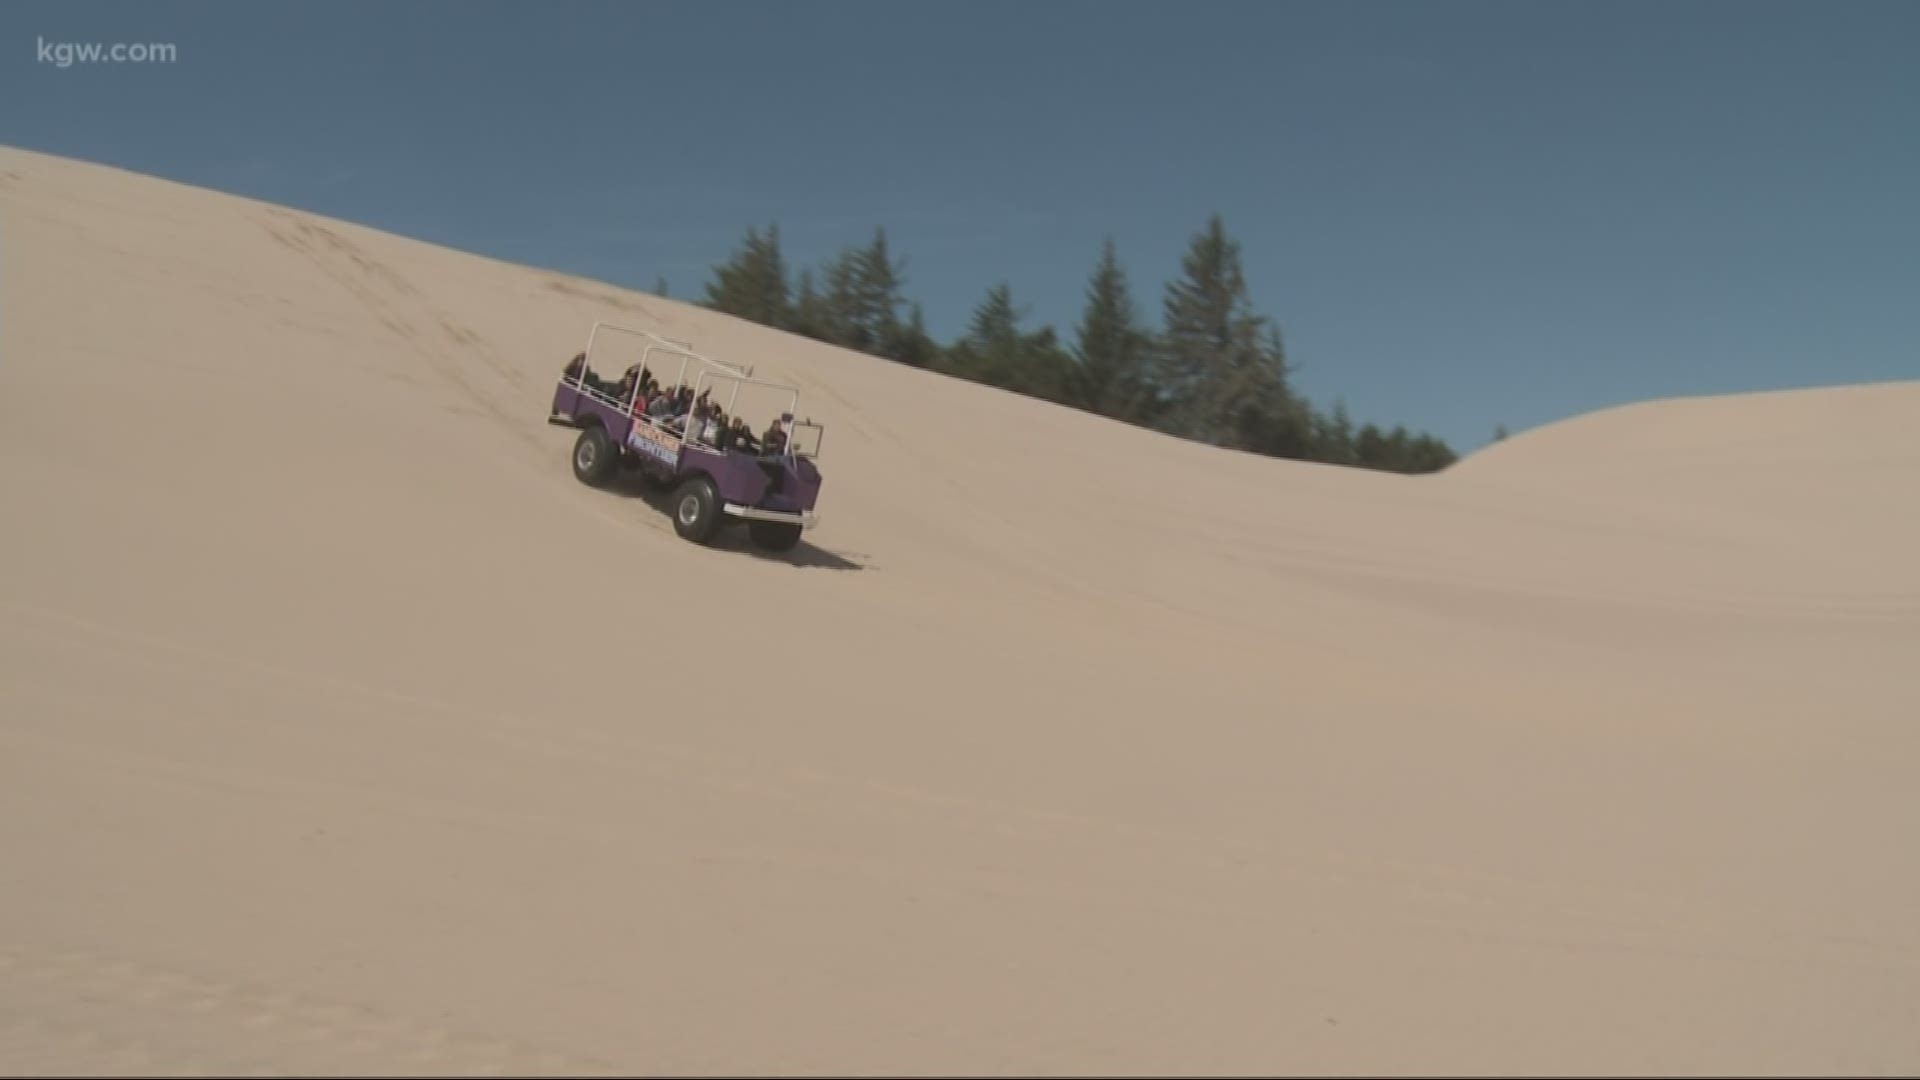 Grant McOmie takes us to Honeyman State Park on the Oregon coast with its massive sand dunes. There's also a nearby botanical garden.